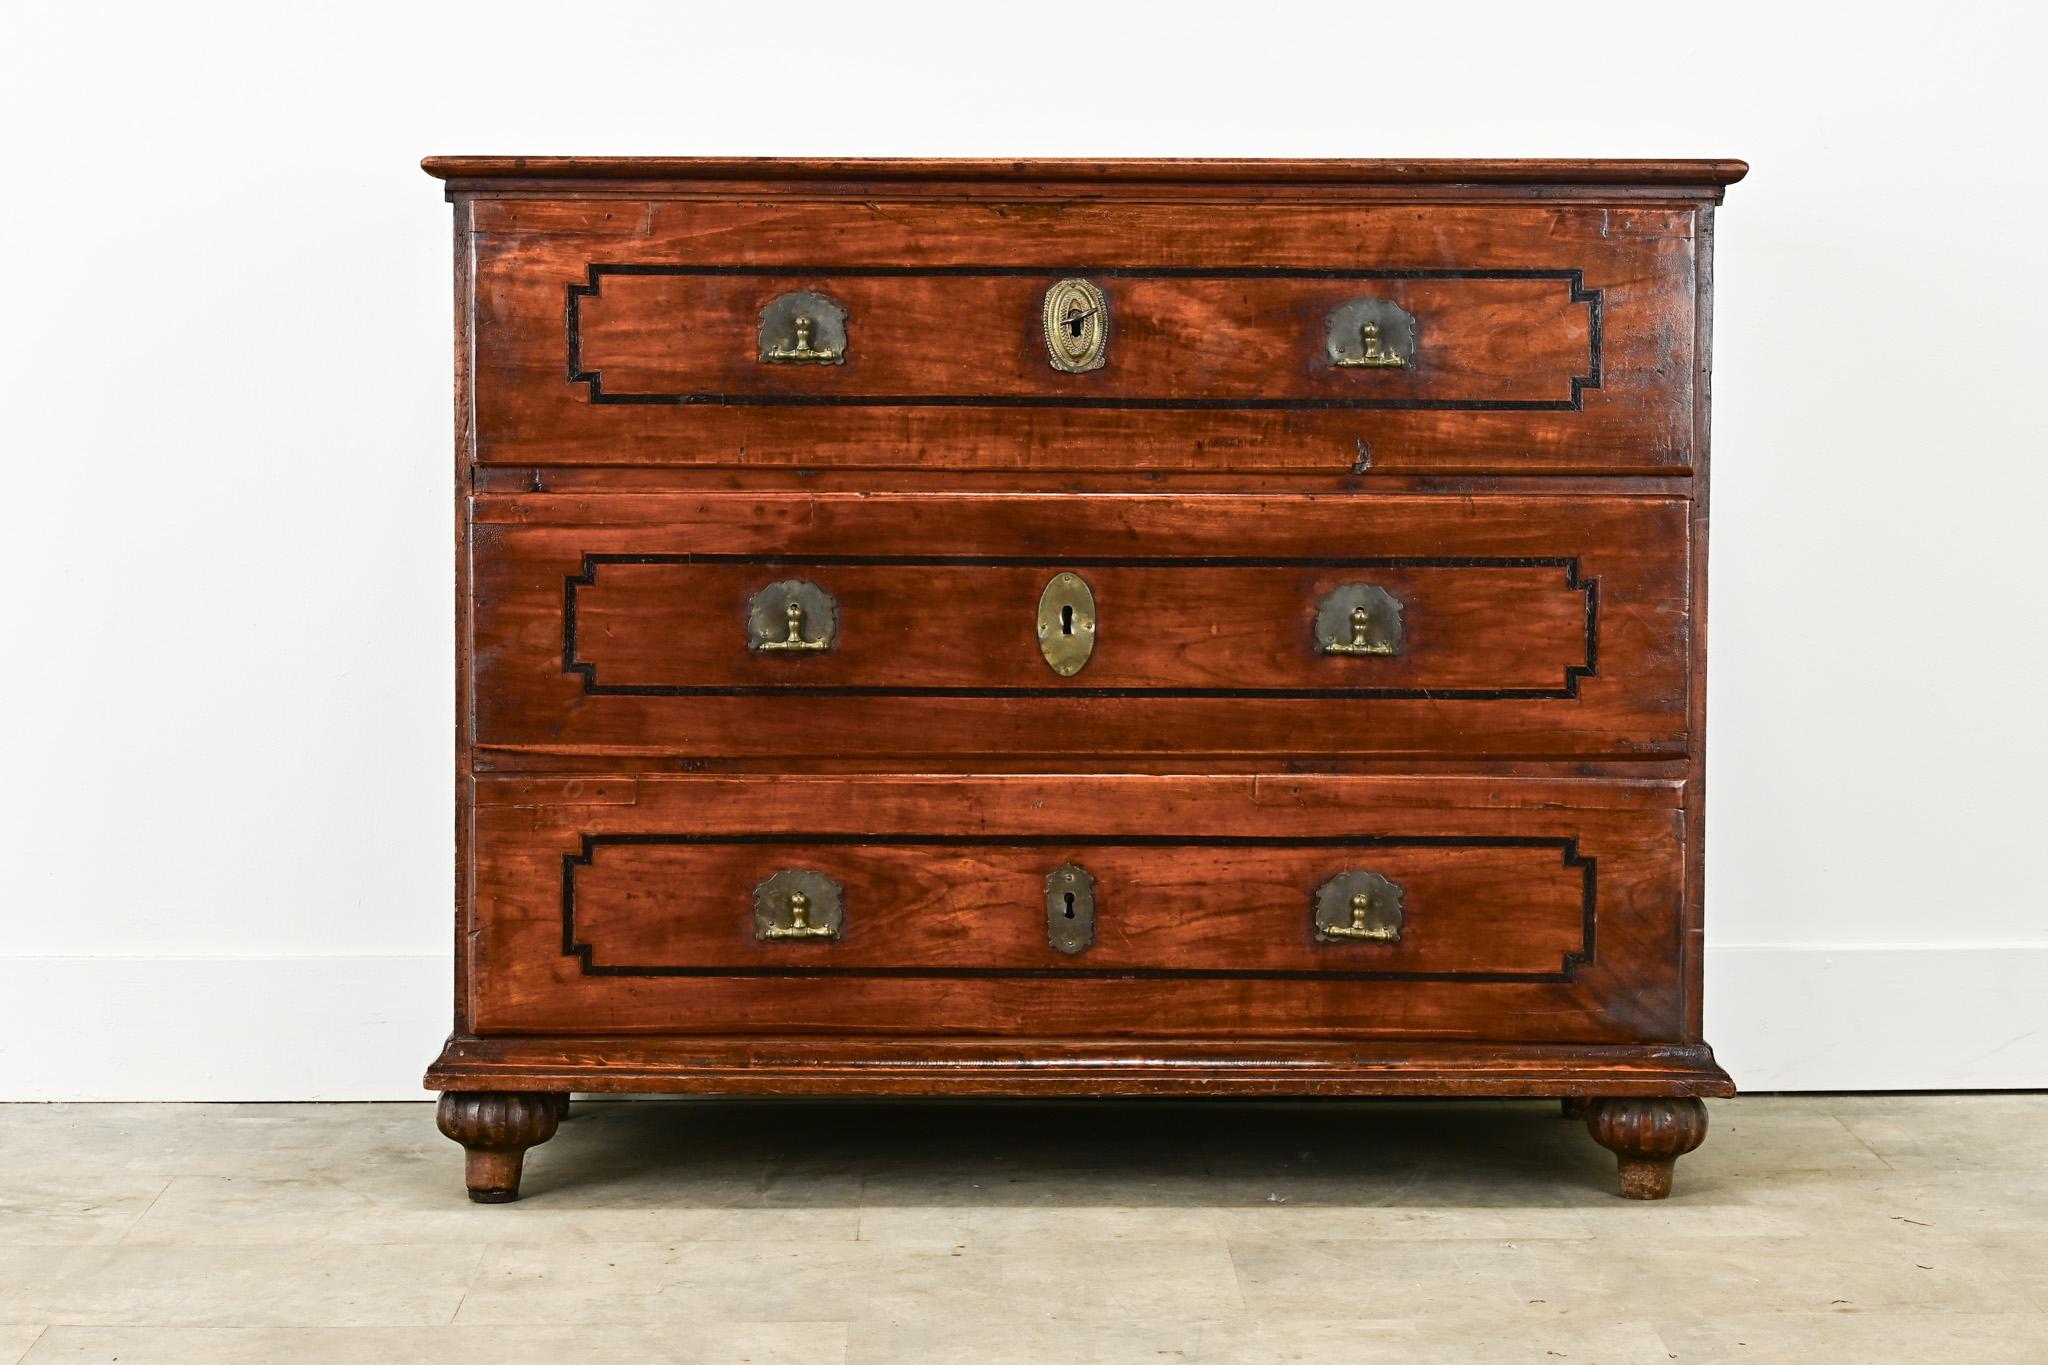 An impressive English chest made from solid wild cherry. The top of the chest has an inlay ebonized banding design, also found on all three drawer fronts. The three easy-to-use drawers have brass two-finger drop pulls and repurposed hand-cut